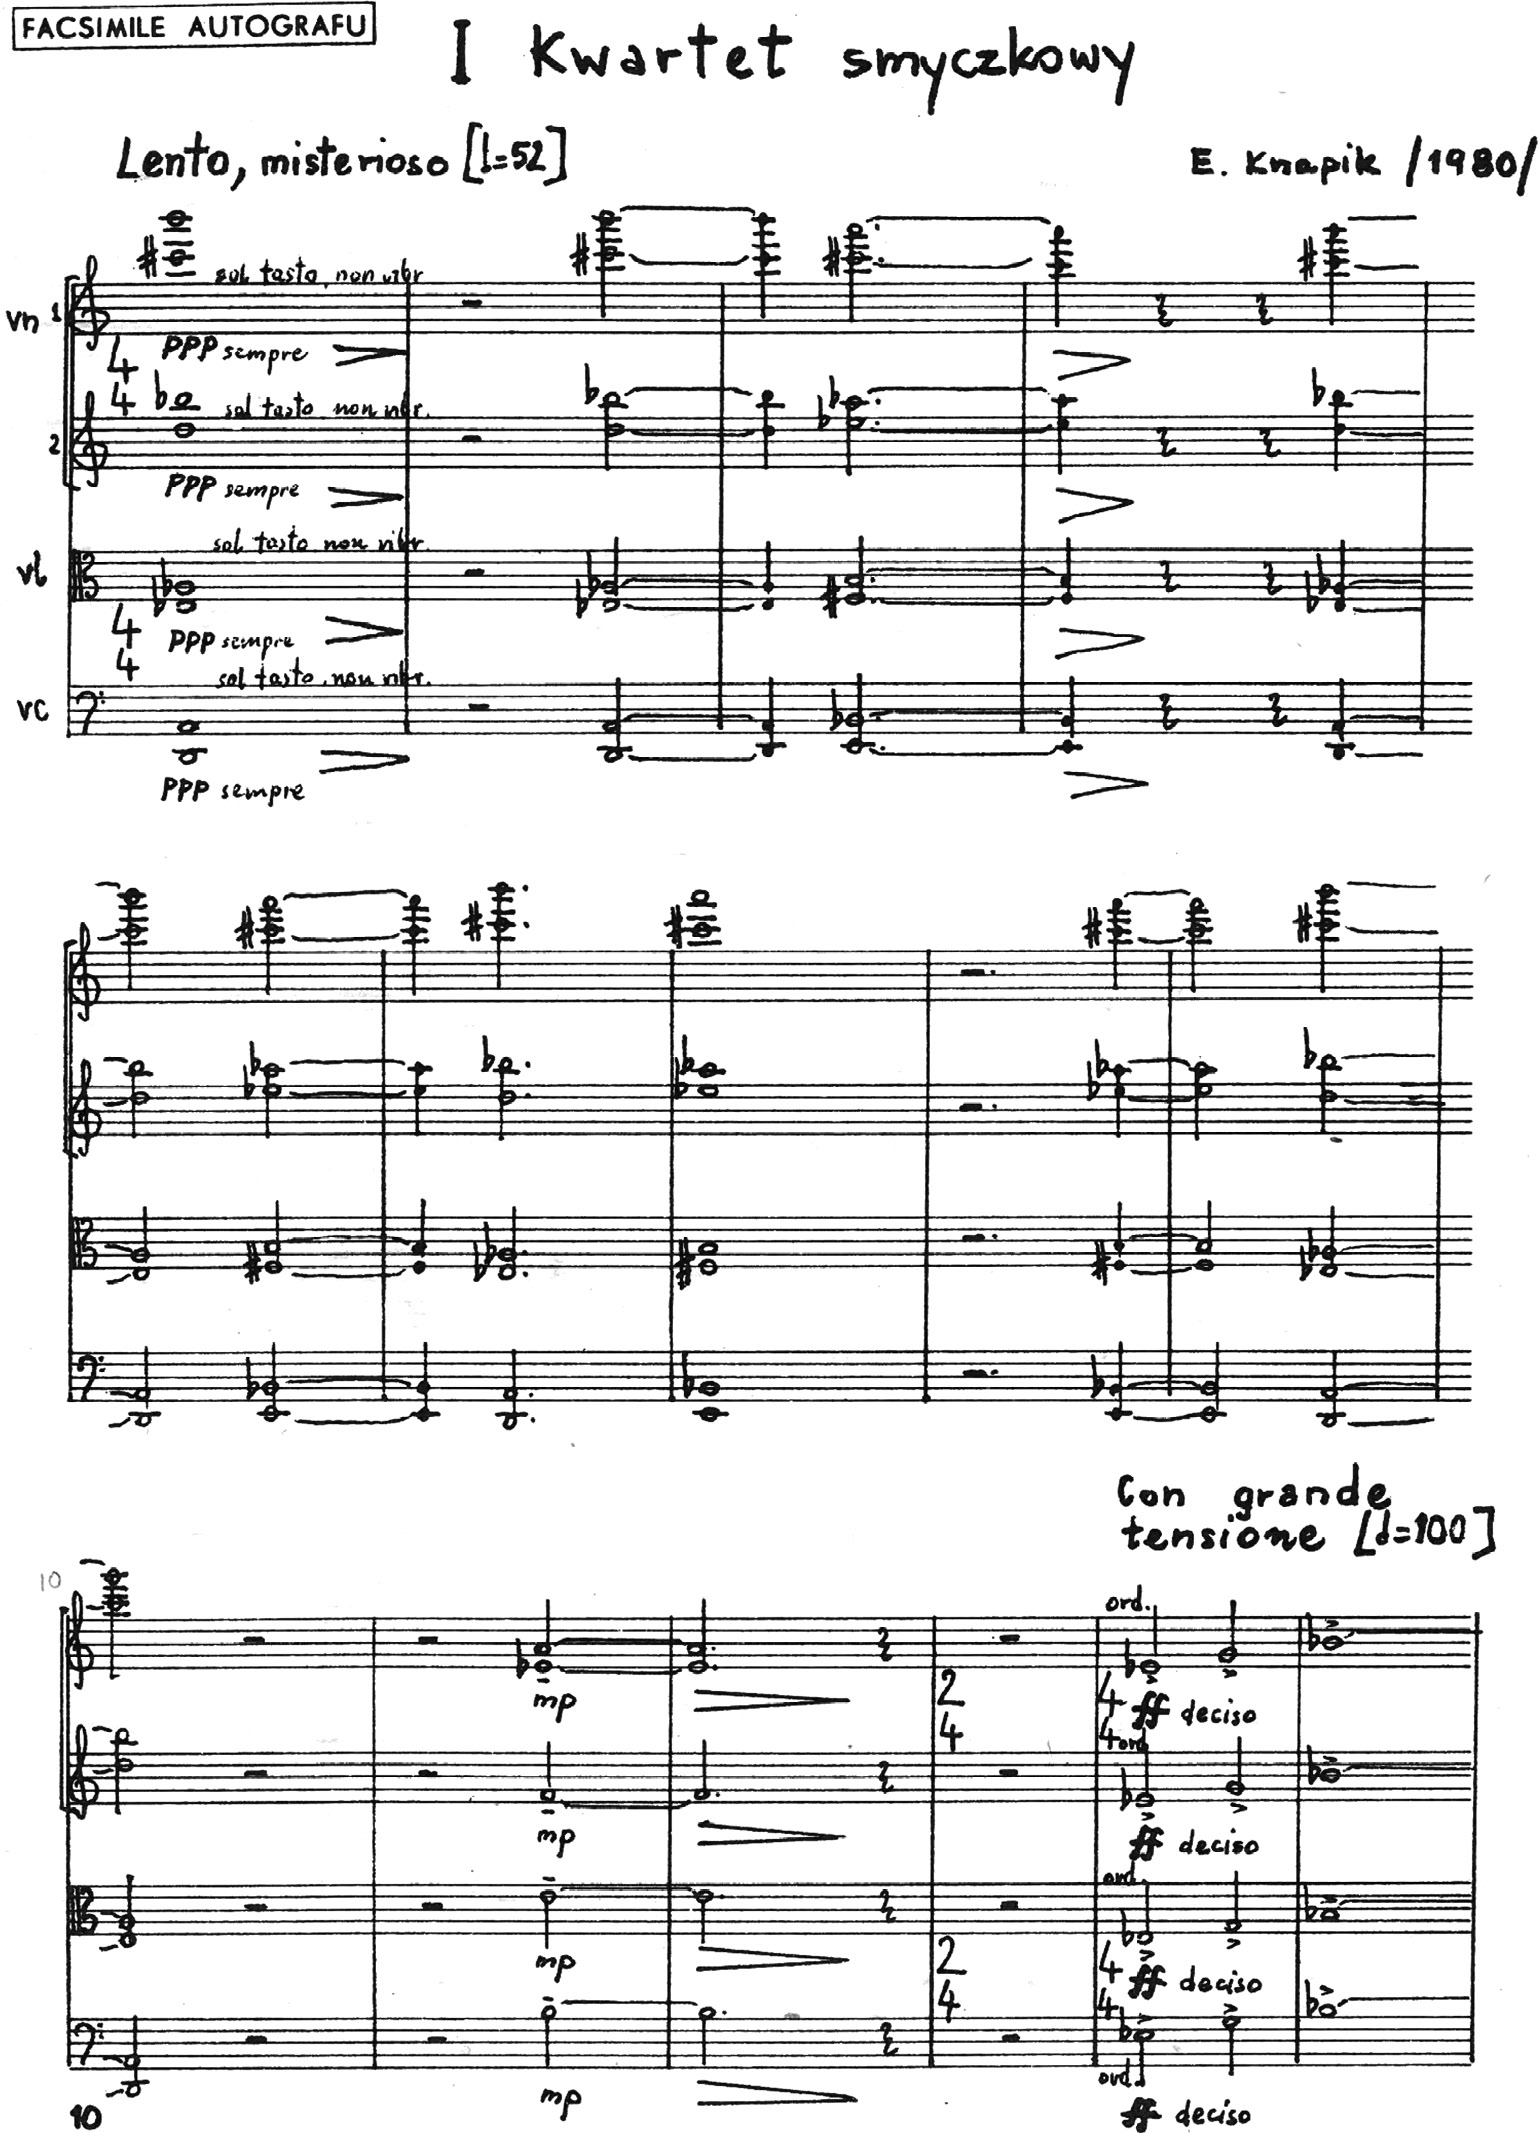 Late Style S Chapter 6 Music Behind The Iron Curtain It would work great for any service or concert and is ideal for the intermediate level pianist. late style s chapter 6 music